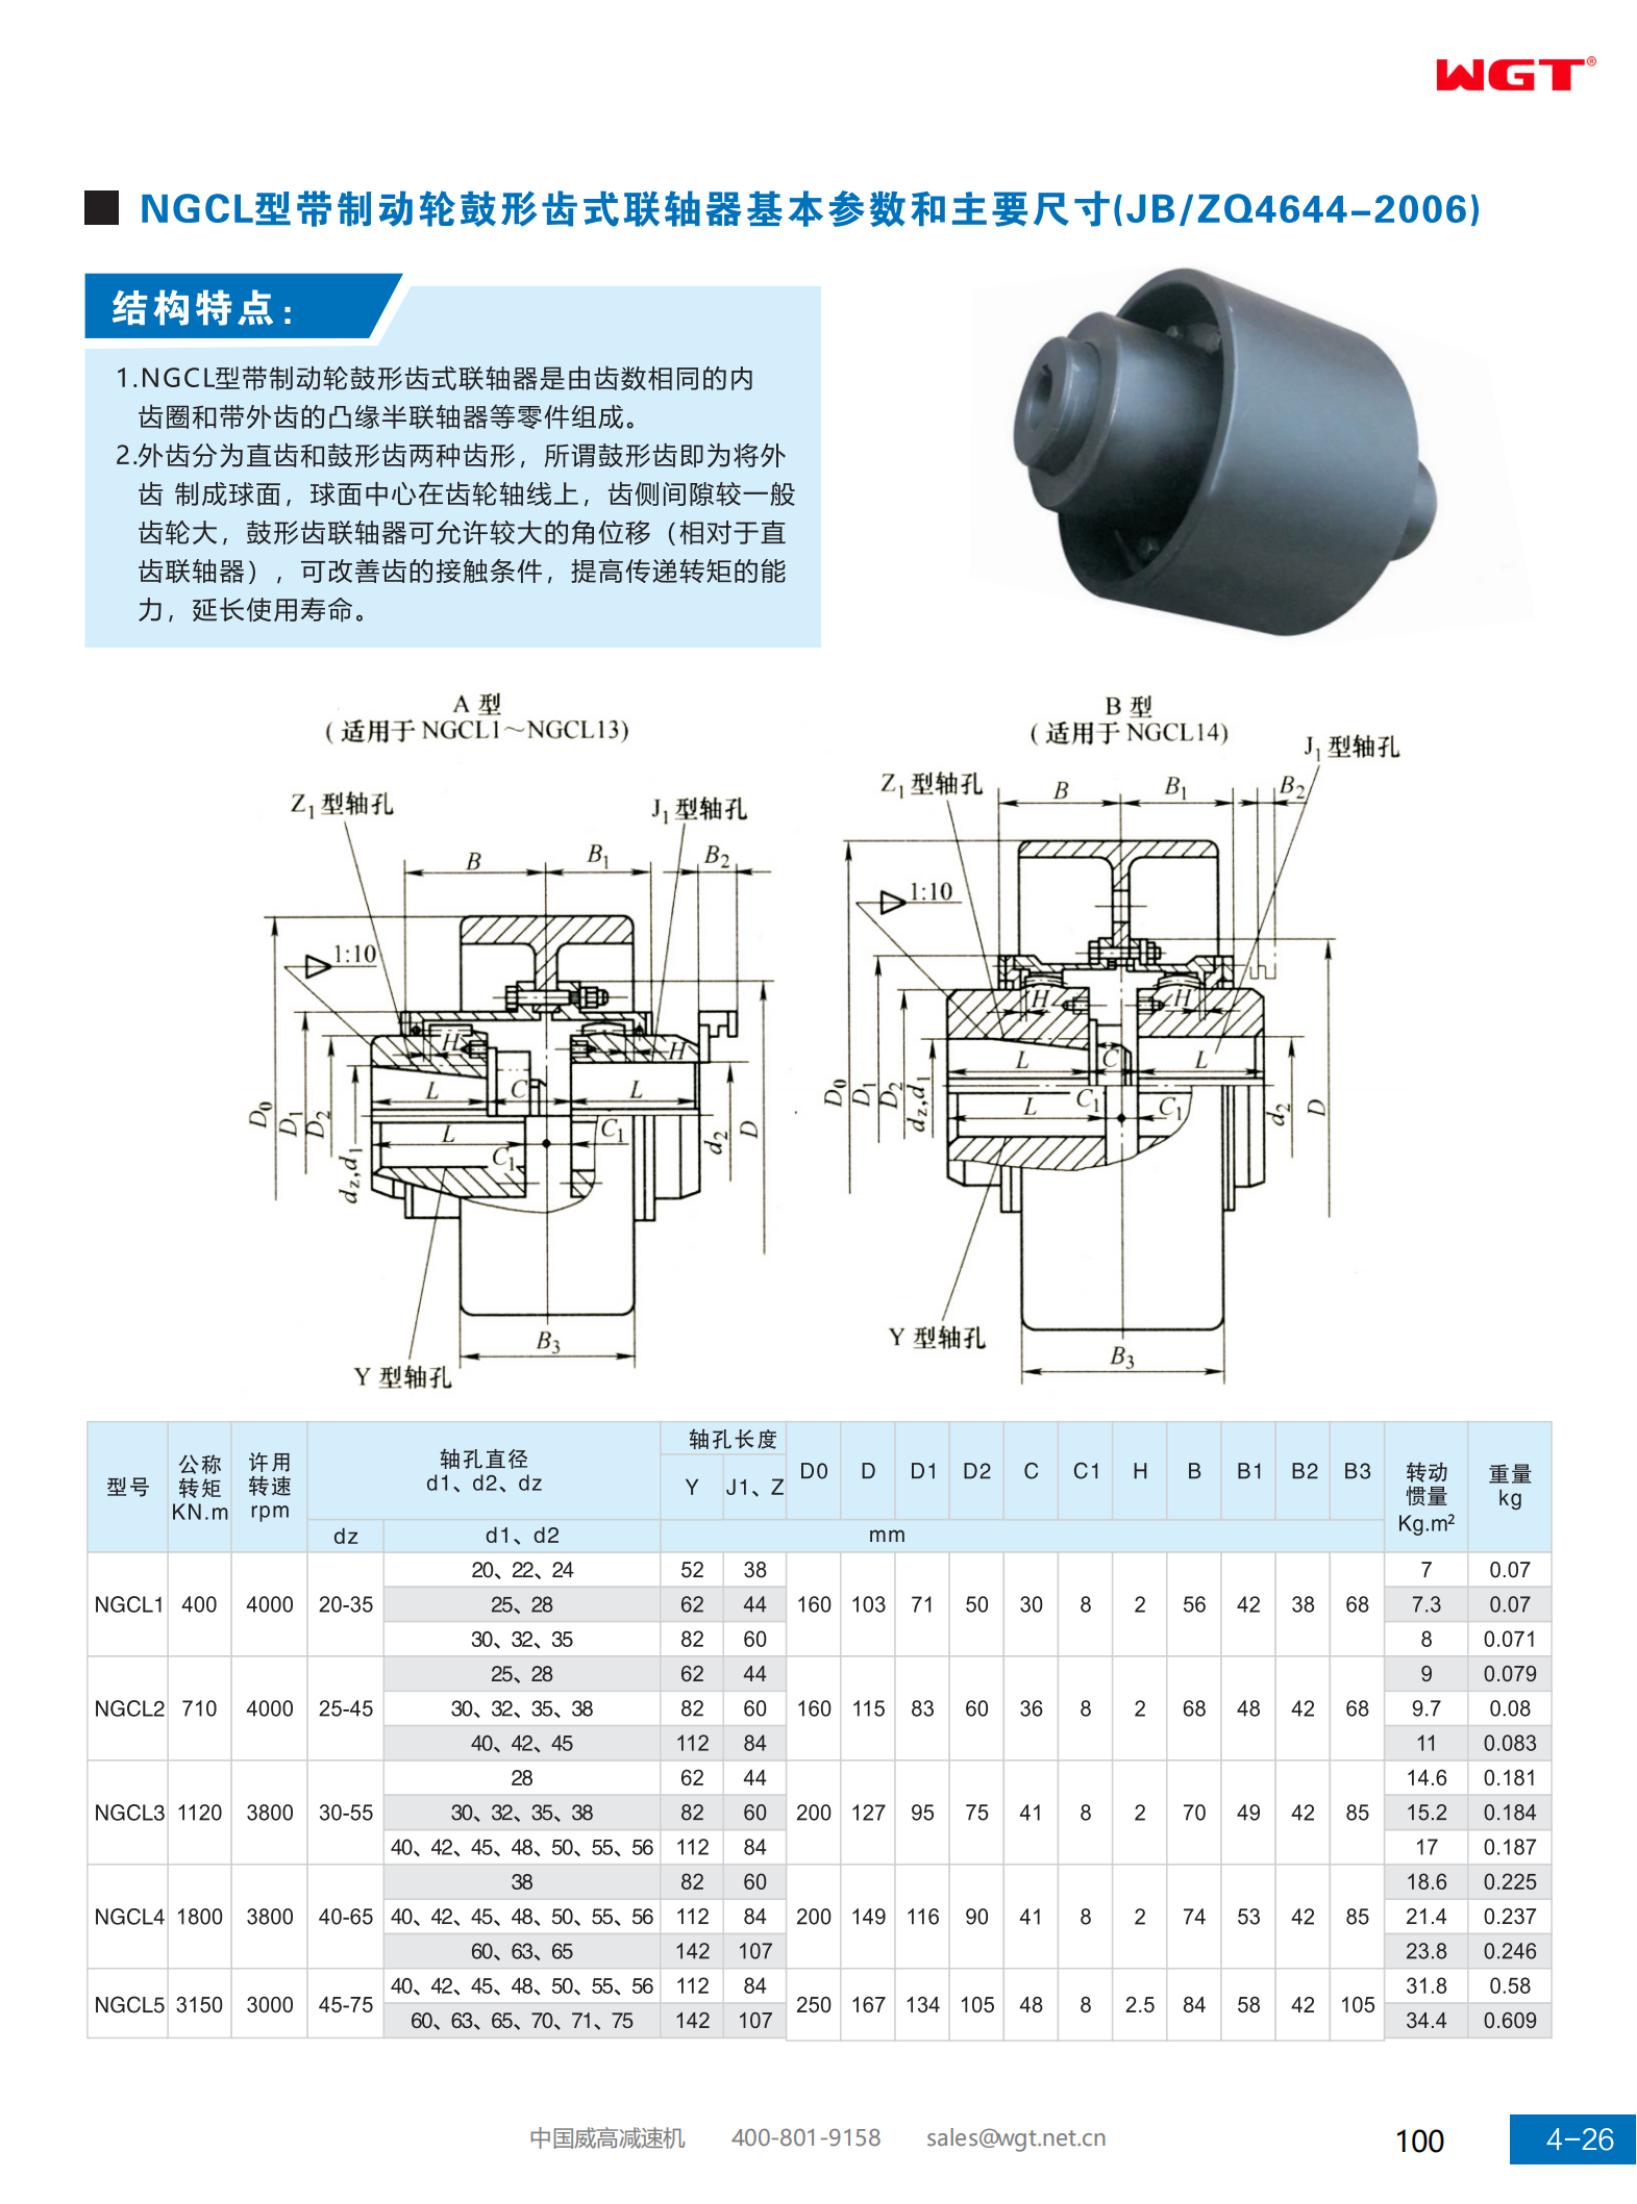 Basic parameters and main dimensions of NGCL drum gear coupling with brake wheel (JB/ZQ4644-2006)